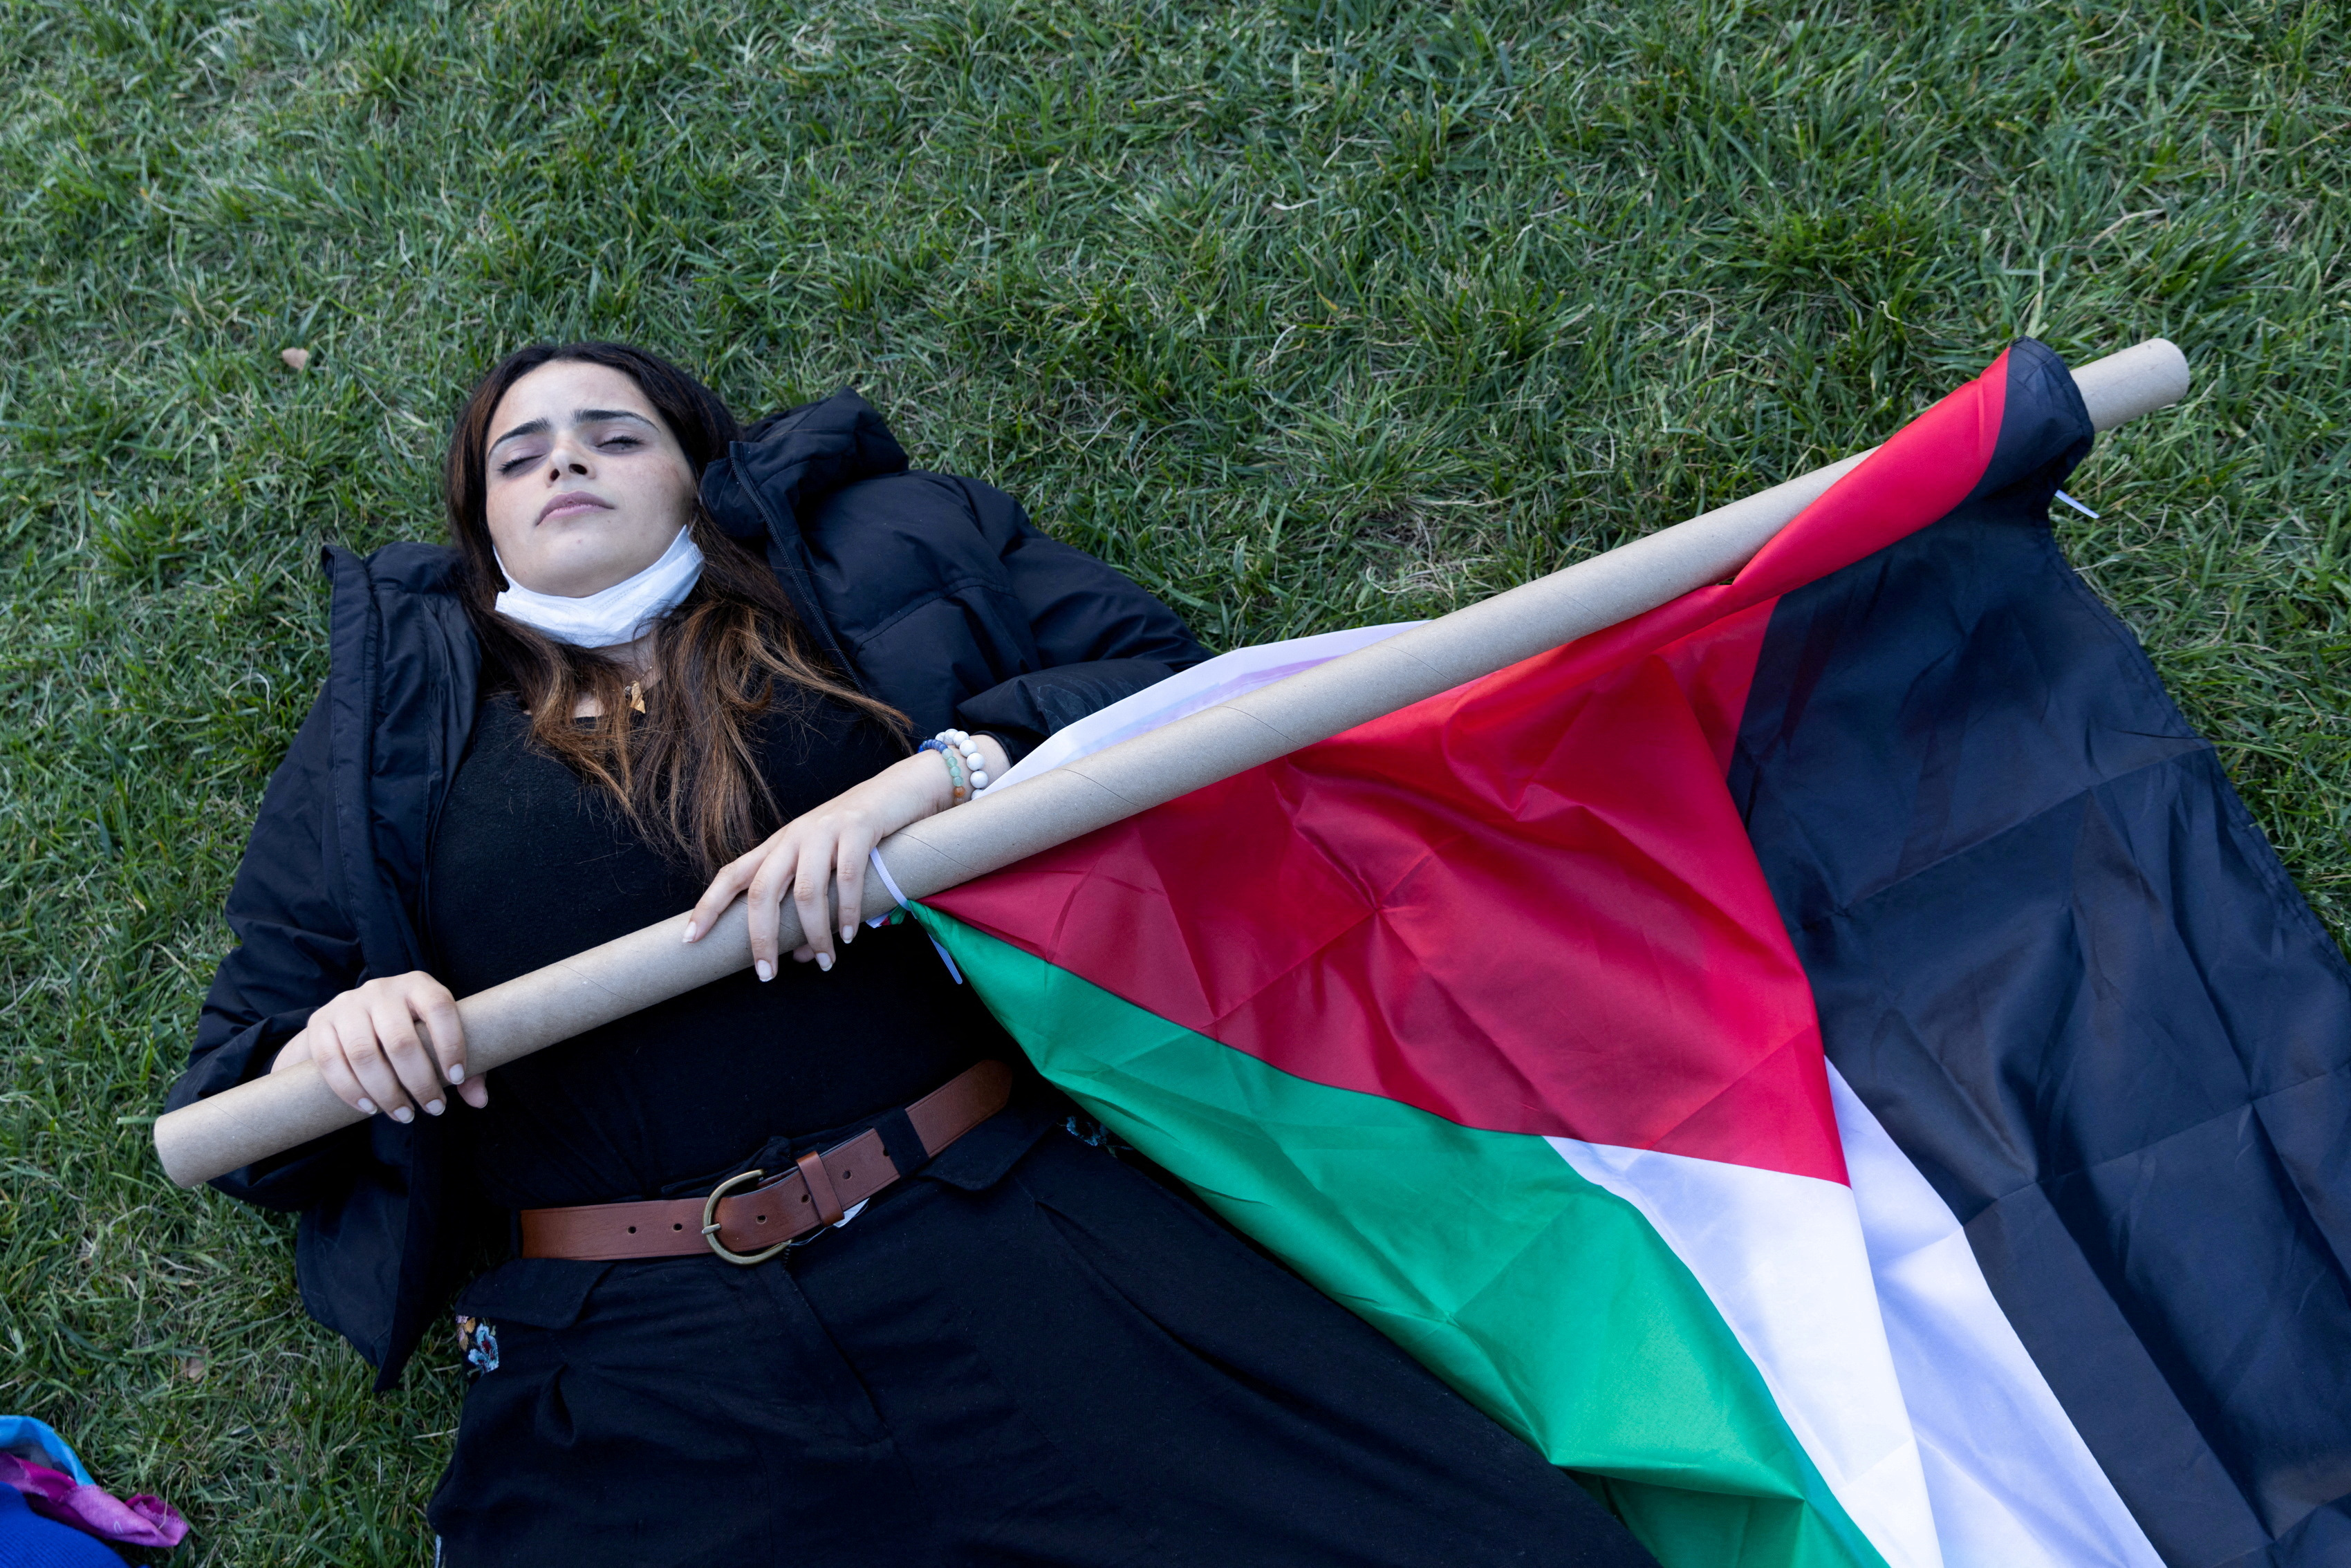 Pro-Palestinian students take part in a protest in support of the Palestinians amid the ongoing conflict in Gaza, at Columbia University in New York City